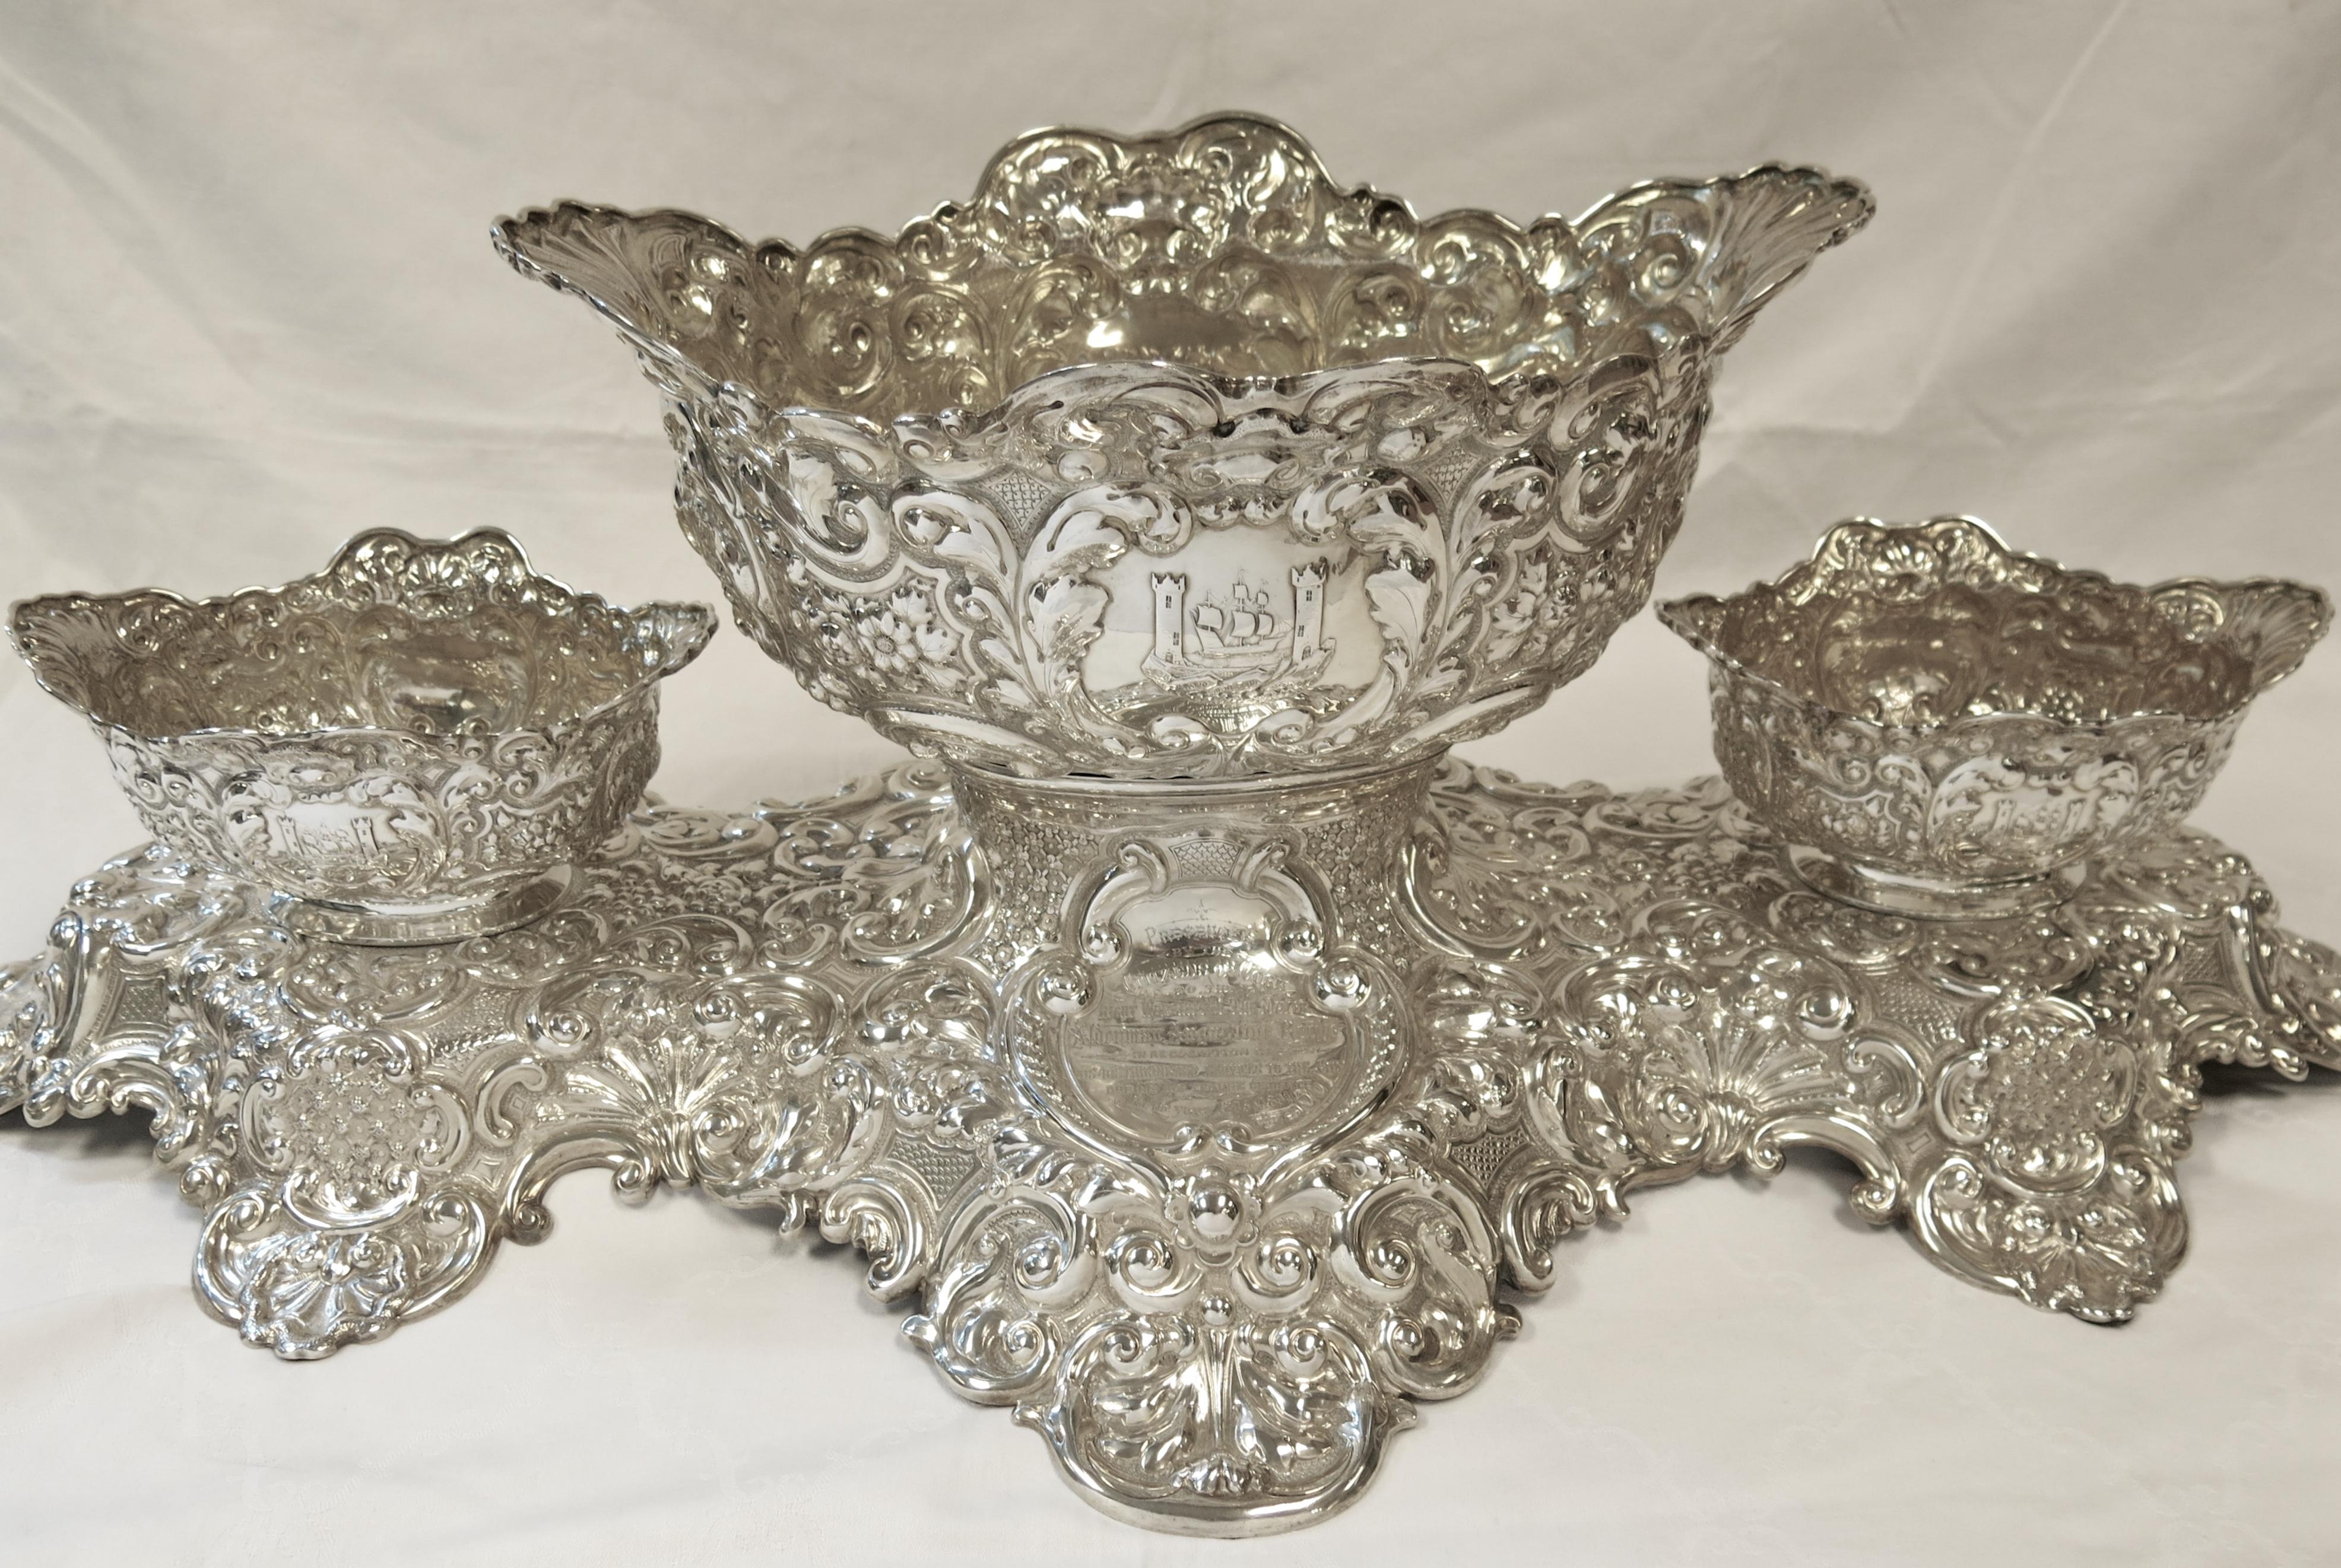 Late Victorian Large and Decorative Antique English Sterling Silver Centerpiece, Irish Interest